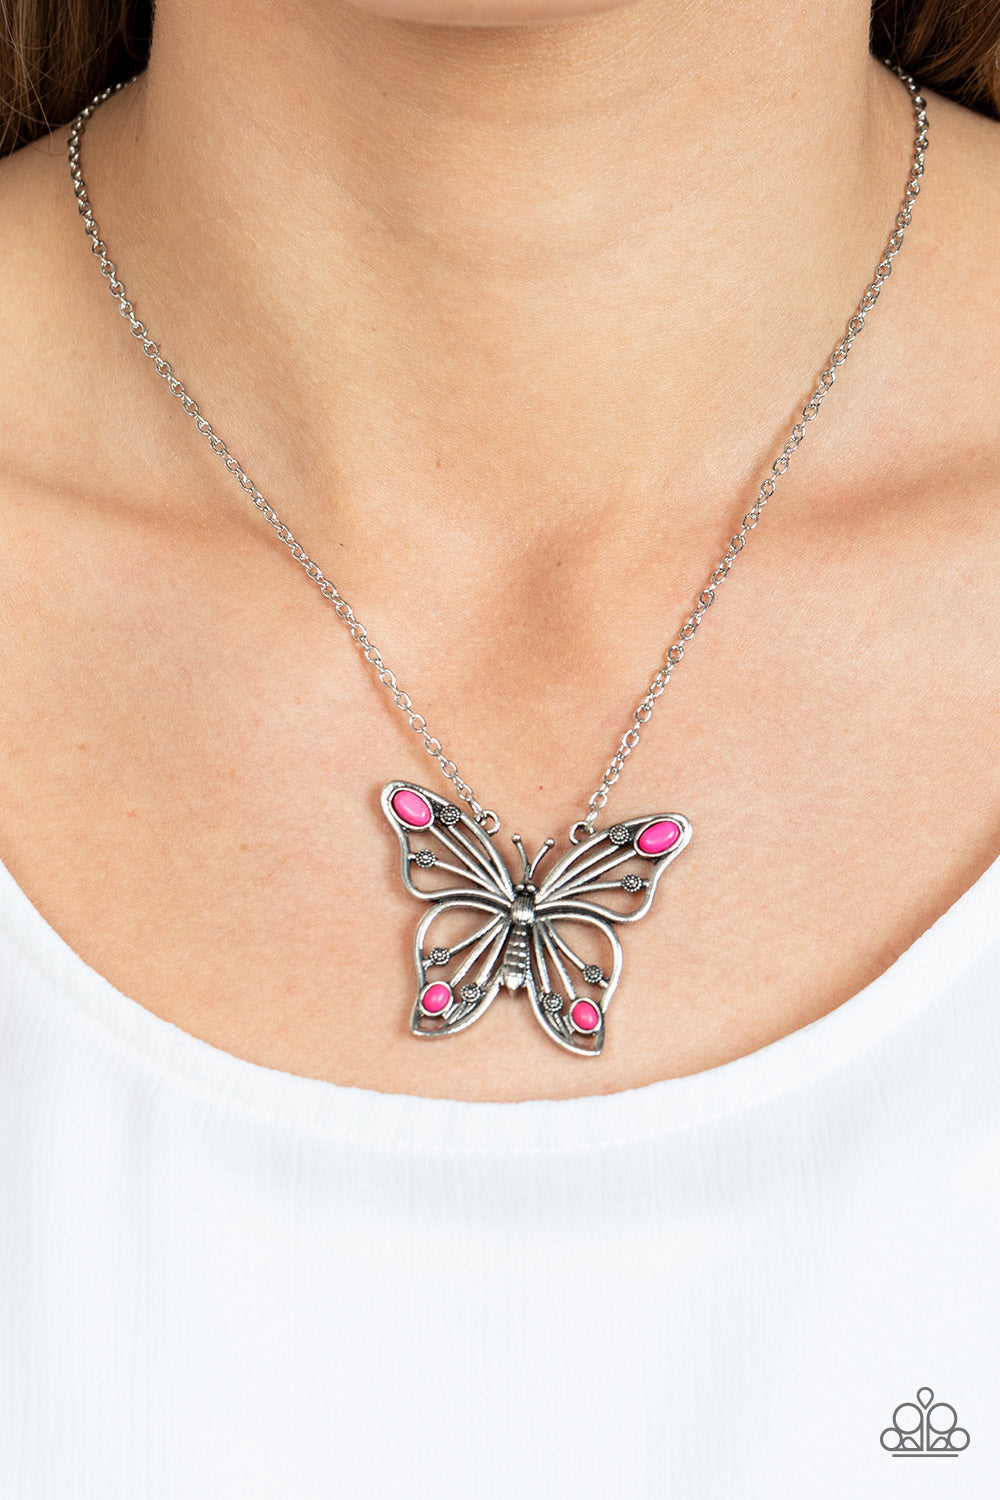 Badlands Butterfly - Pink Oval Stones/Decorative Silver Butterfly Pendant Paparazzi Necklace & matching earrings